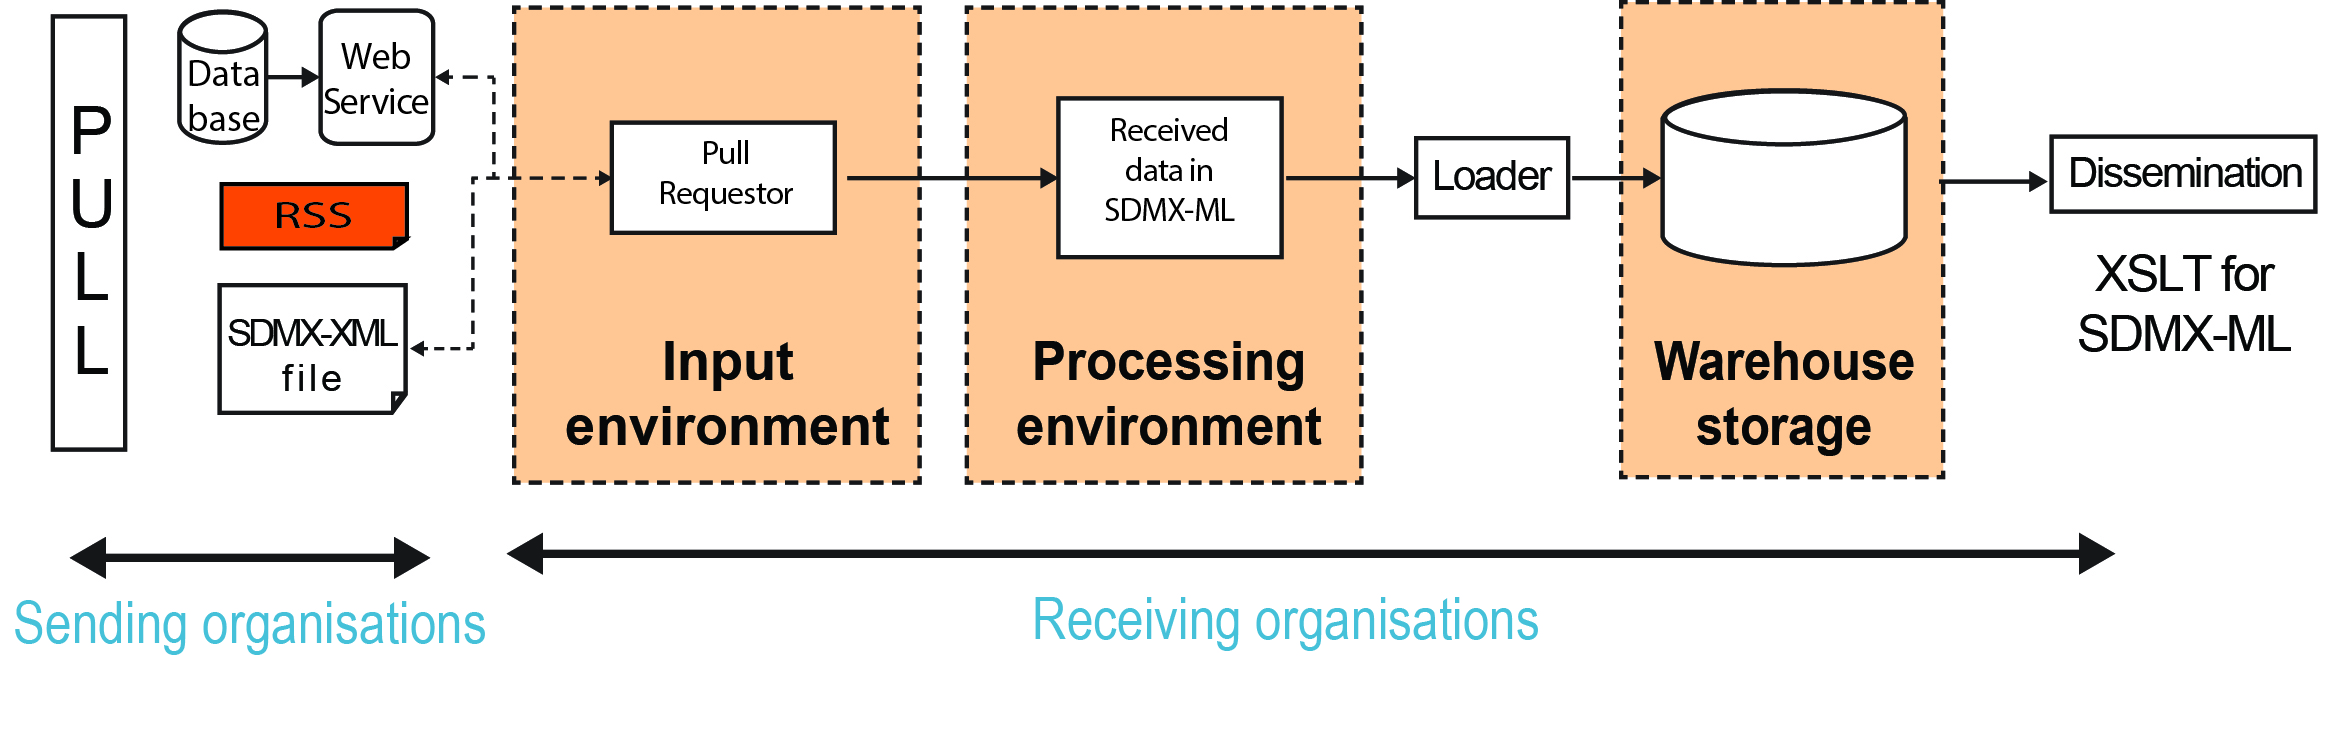 This flow diagram shows that in the pull architecture, sending organisations make their data available via SDMX-compliant web services. Receiving organisations pull the data they need form the SDMX-compliant web service, process the incoming data, then load them in their production databases, and finally disseminate the data.